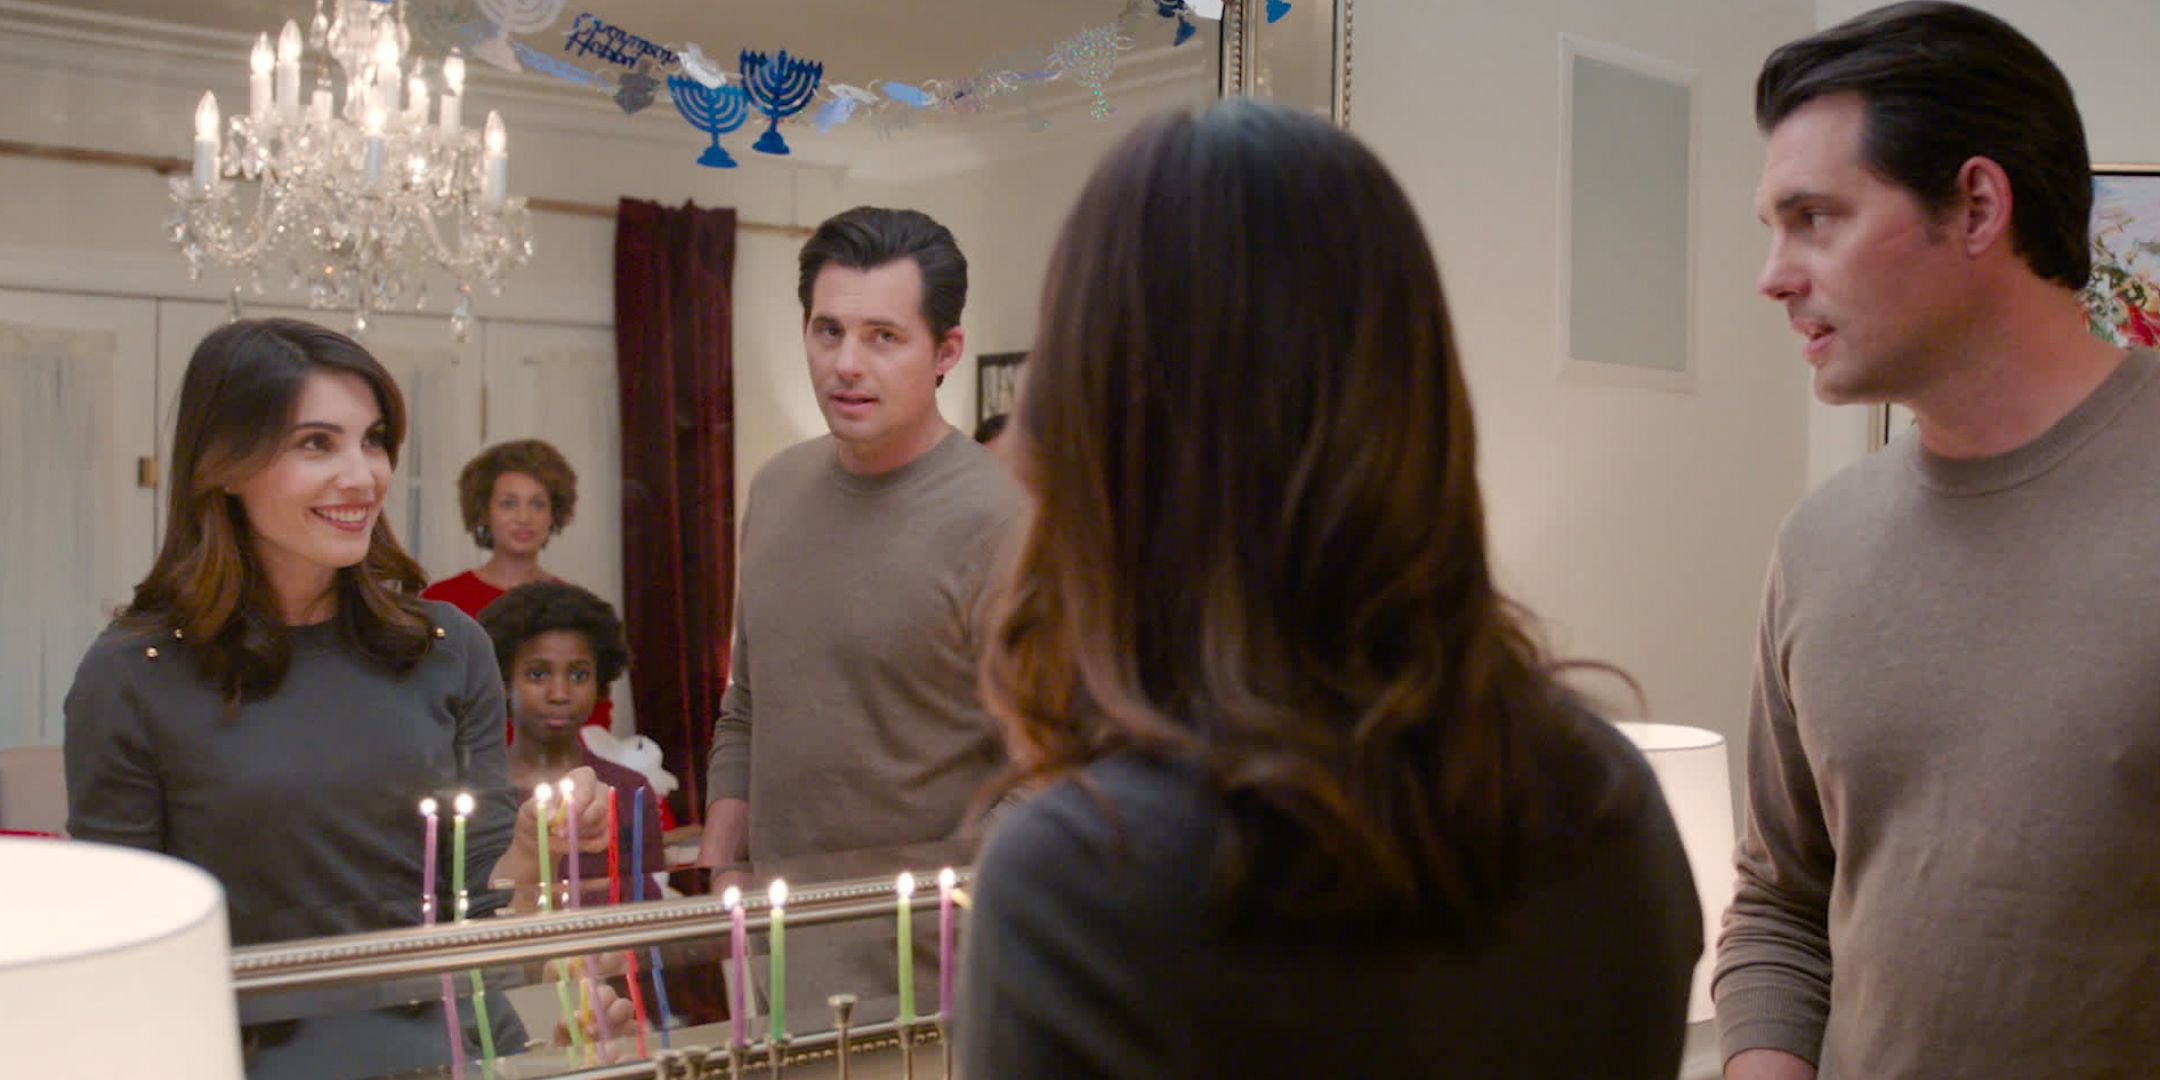 Rebeca And Chris stand in front of a mirror while lighting a menorah in Double Holiday